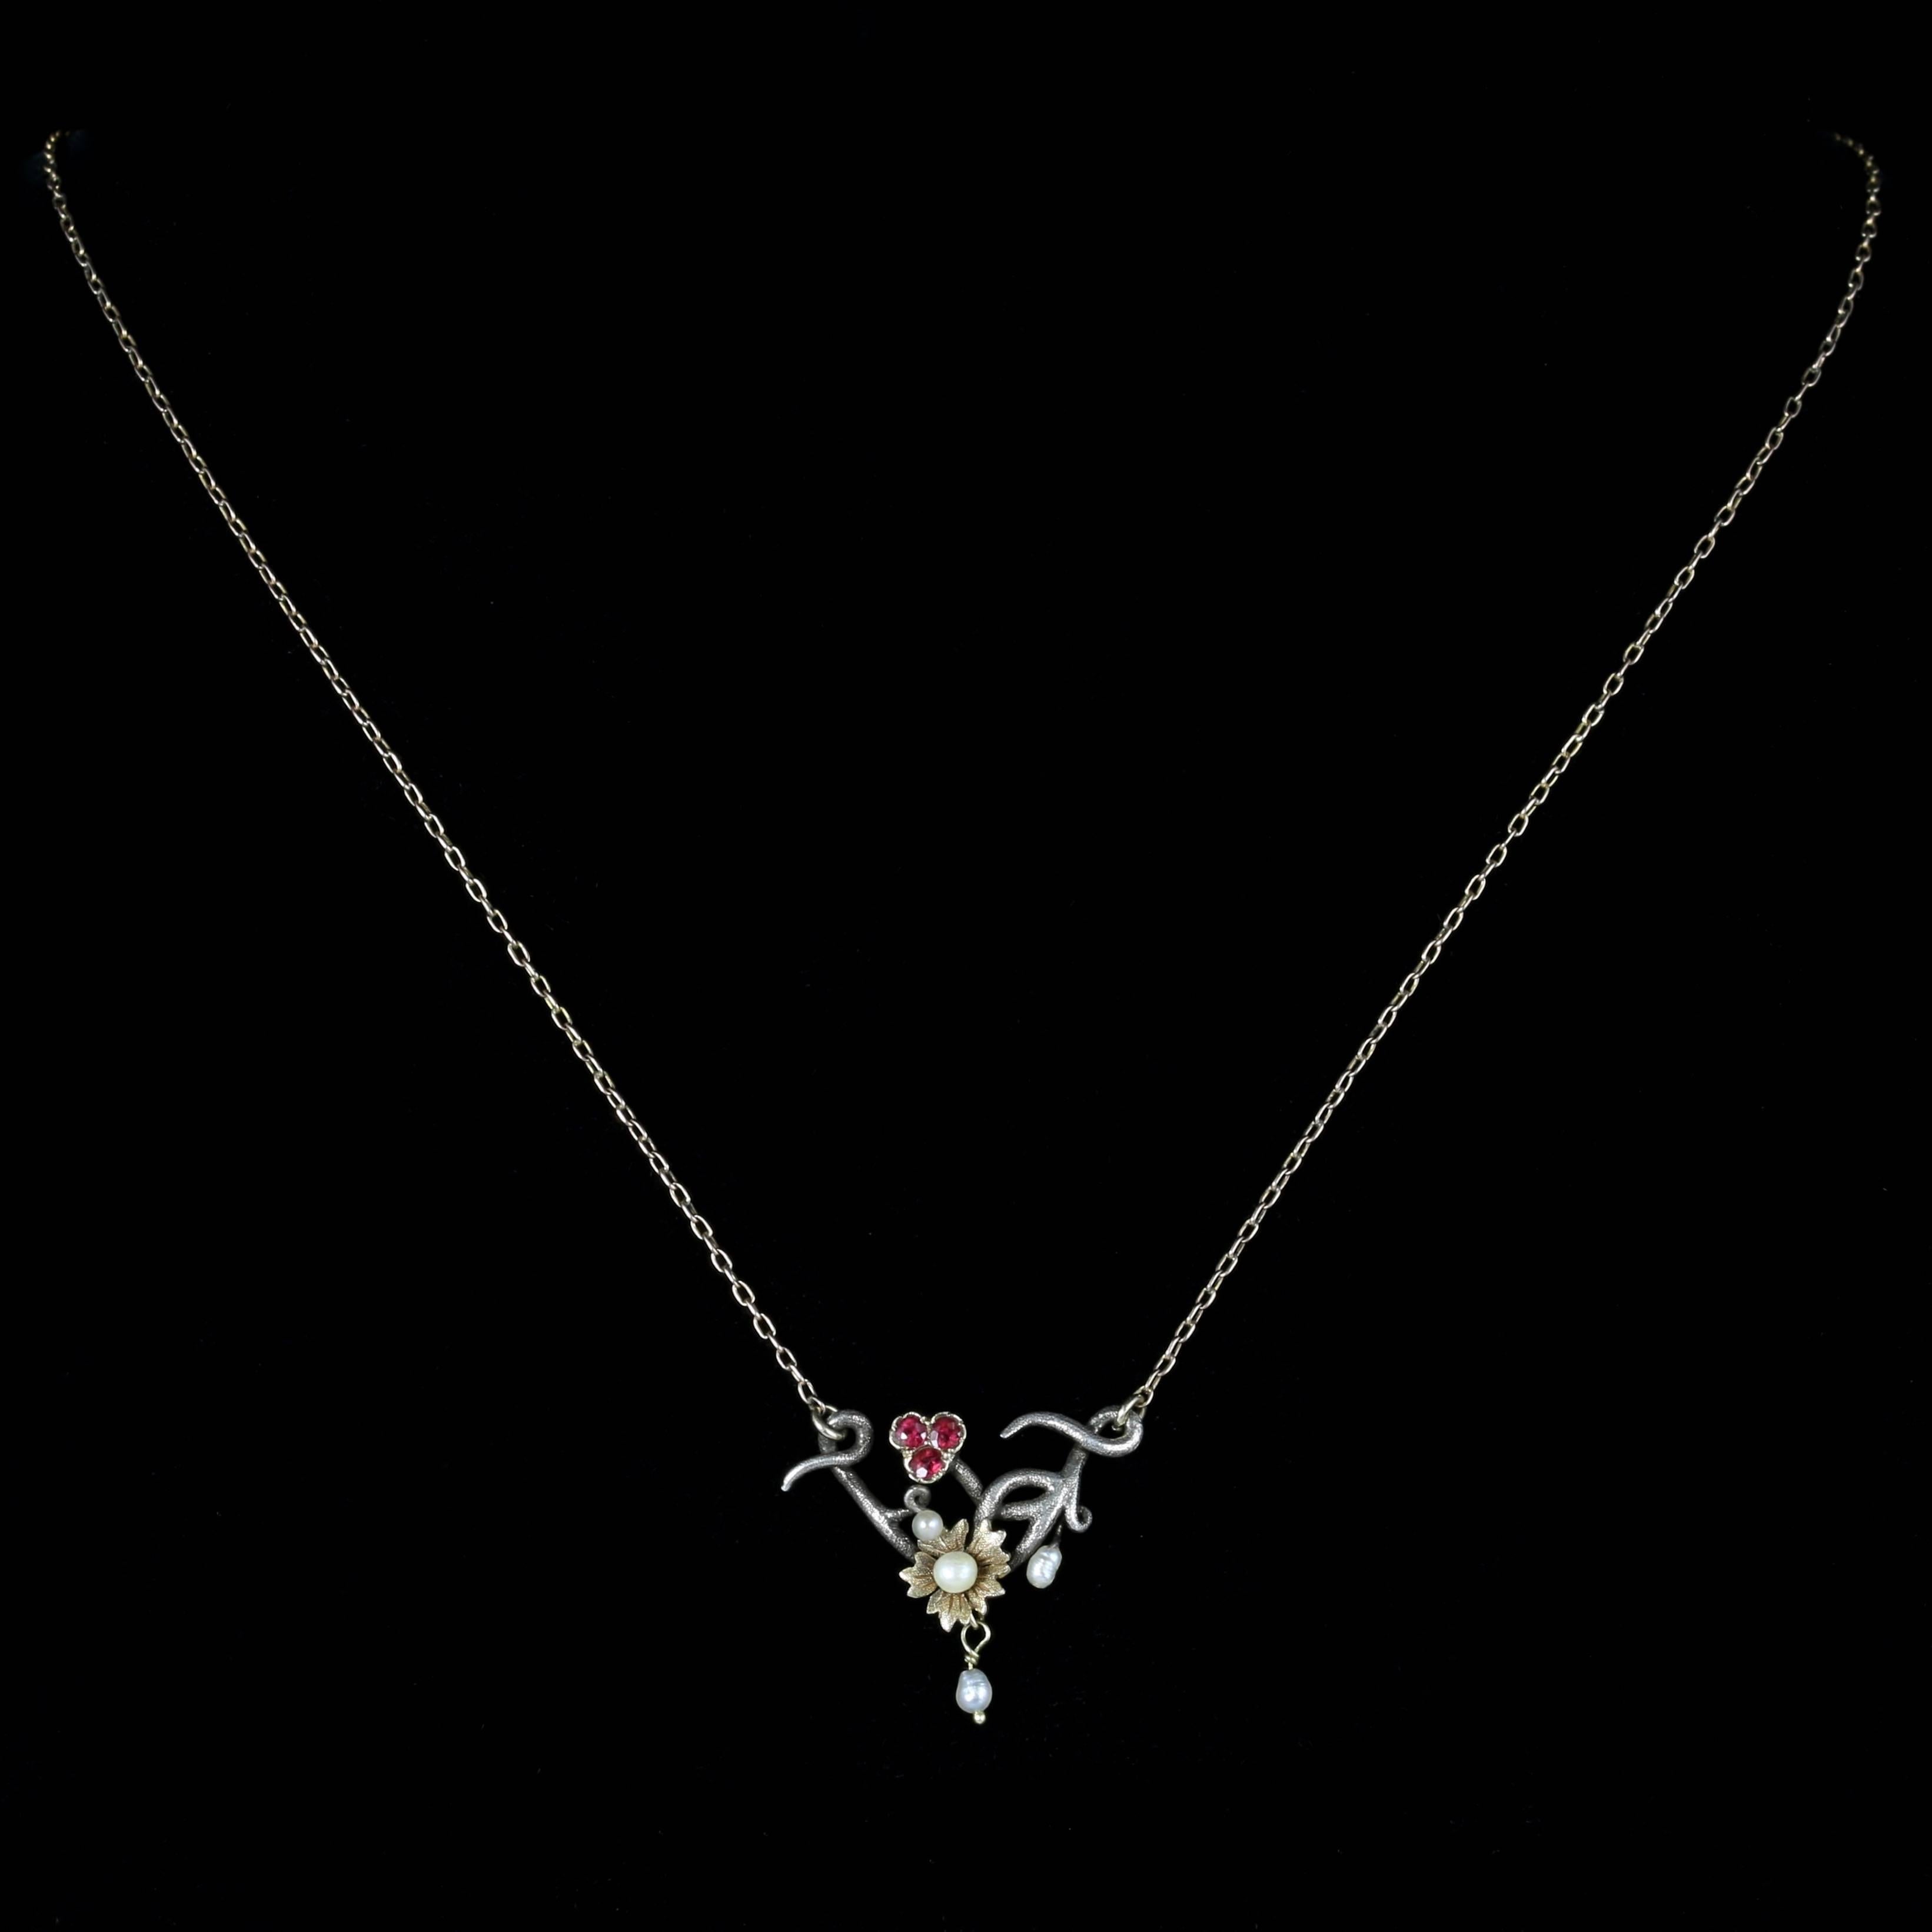 For more details please click continue reading down below...

This beautiful Ruby and Pearl necklace is set in 9ct Yellow Gold and Silver. Circa 1900

Made in the Art Nouveau style.

Lovely rich pink Rubies and lustrous natural Pearls adorn this